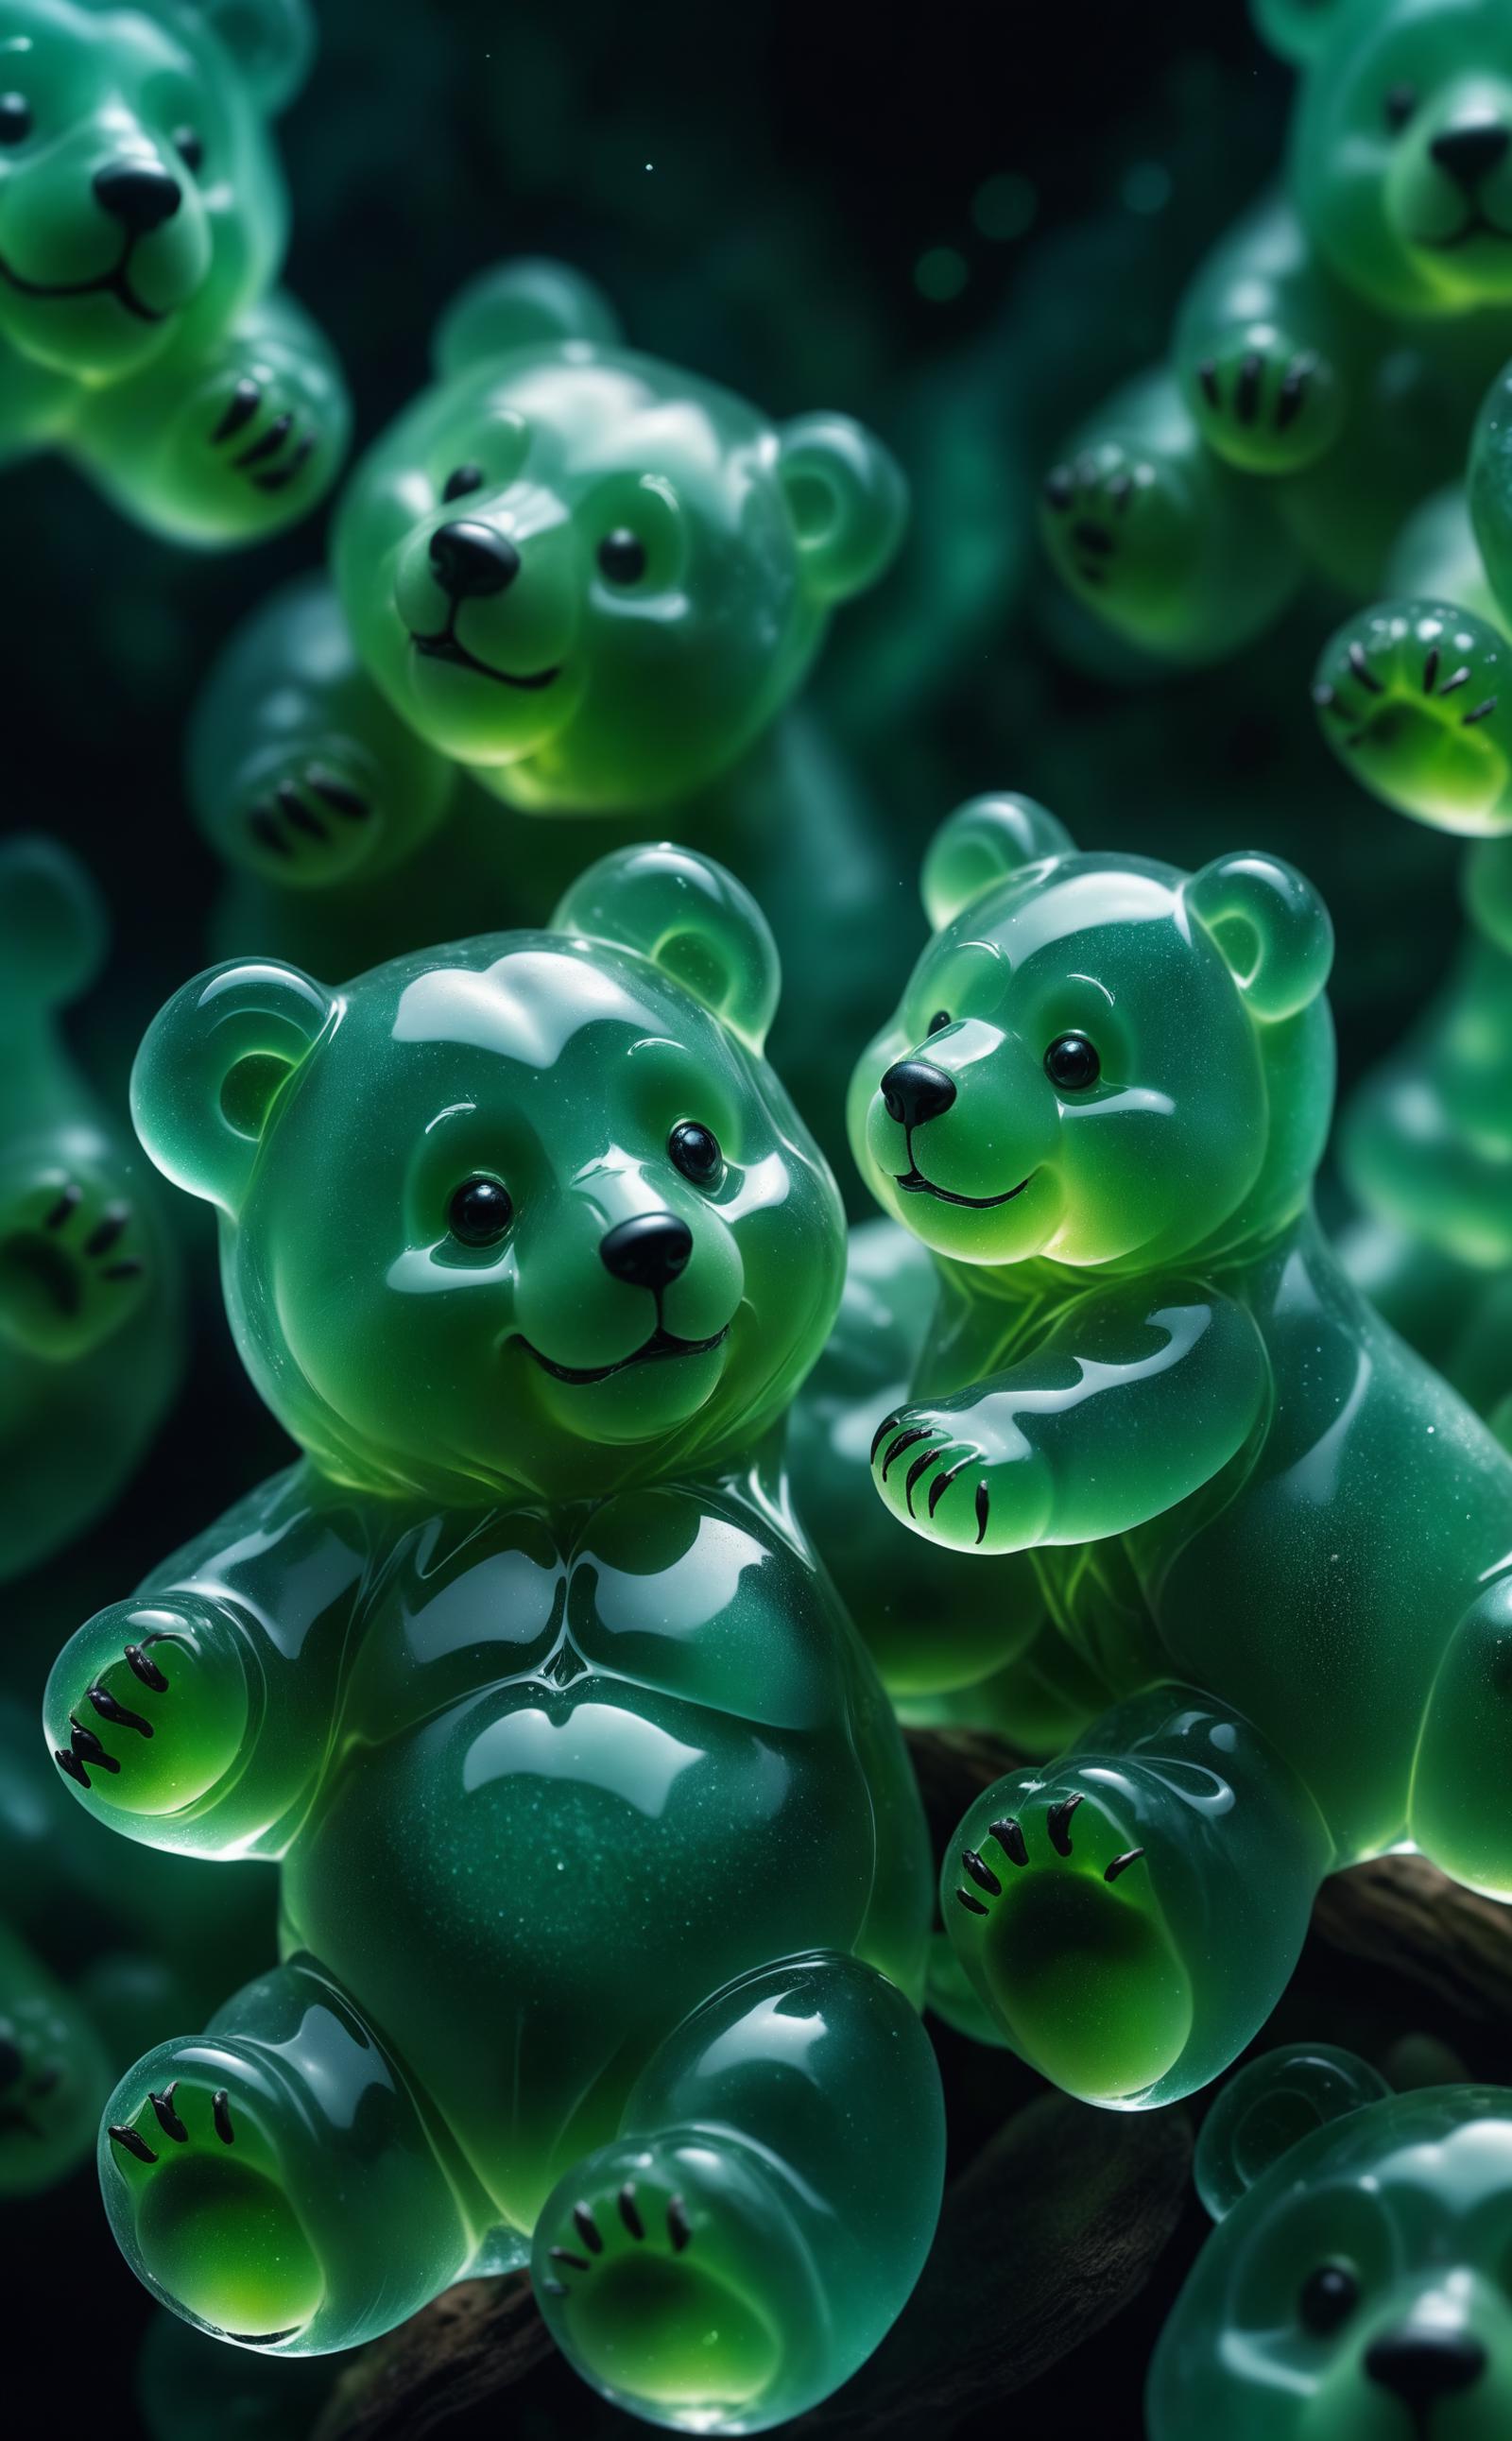 A group of green teddy bear toys with black eyes.